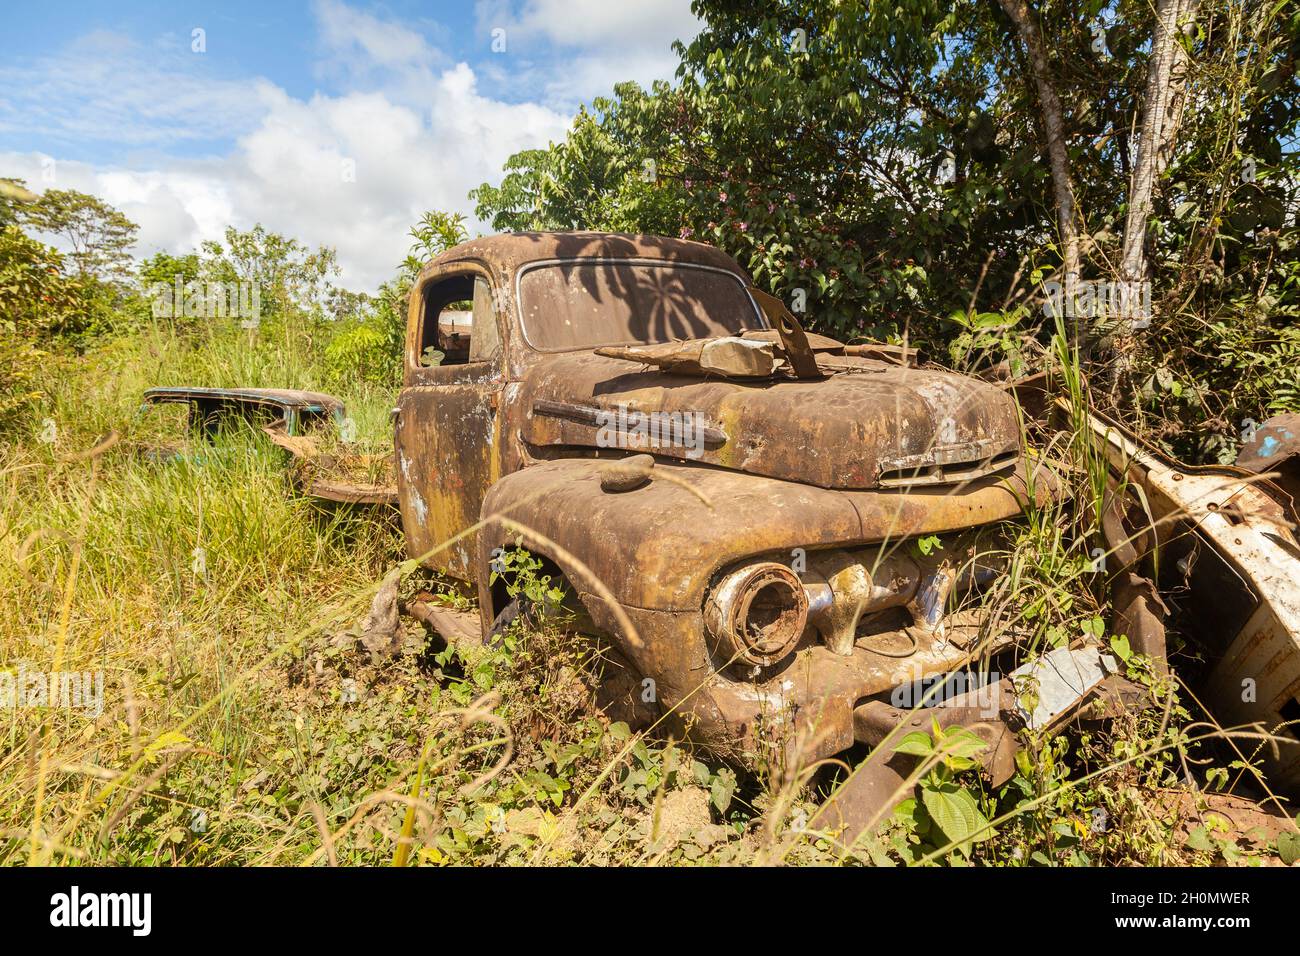 Pilcopata, Peru - April 12, 2014: An old Ford truck, rusted and abandoned, engulfed by weeds, rests in the surroundings of Pilcopata Stock Photo